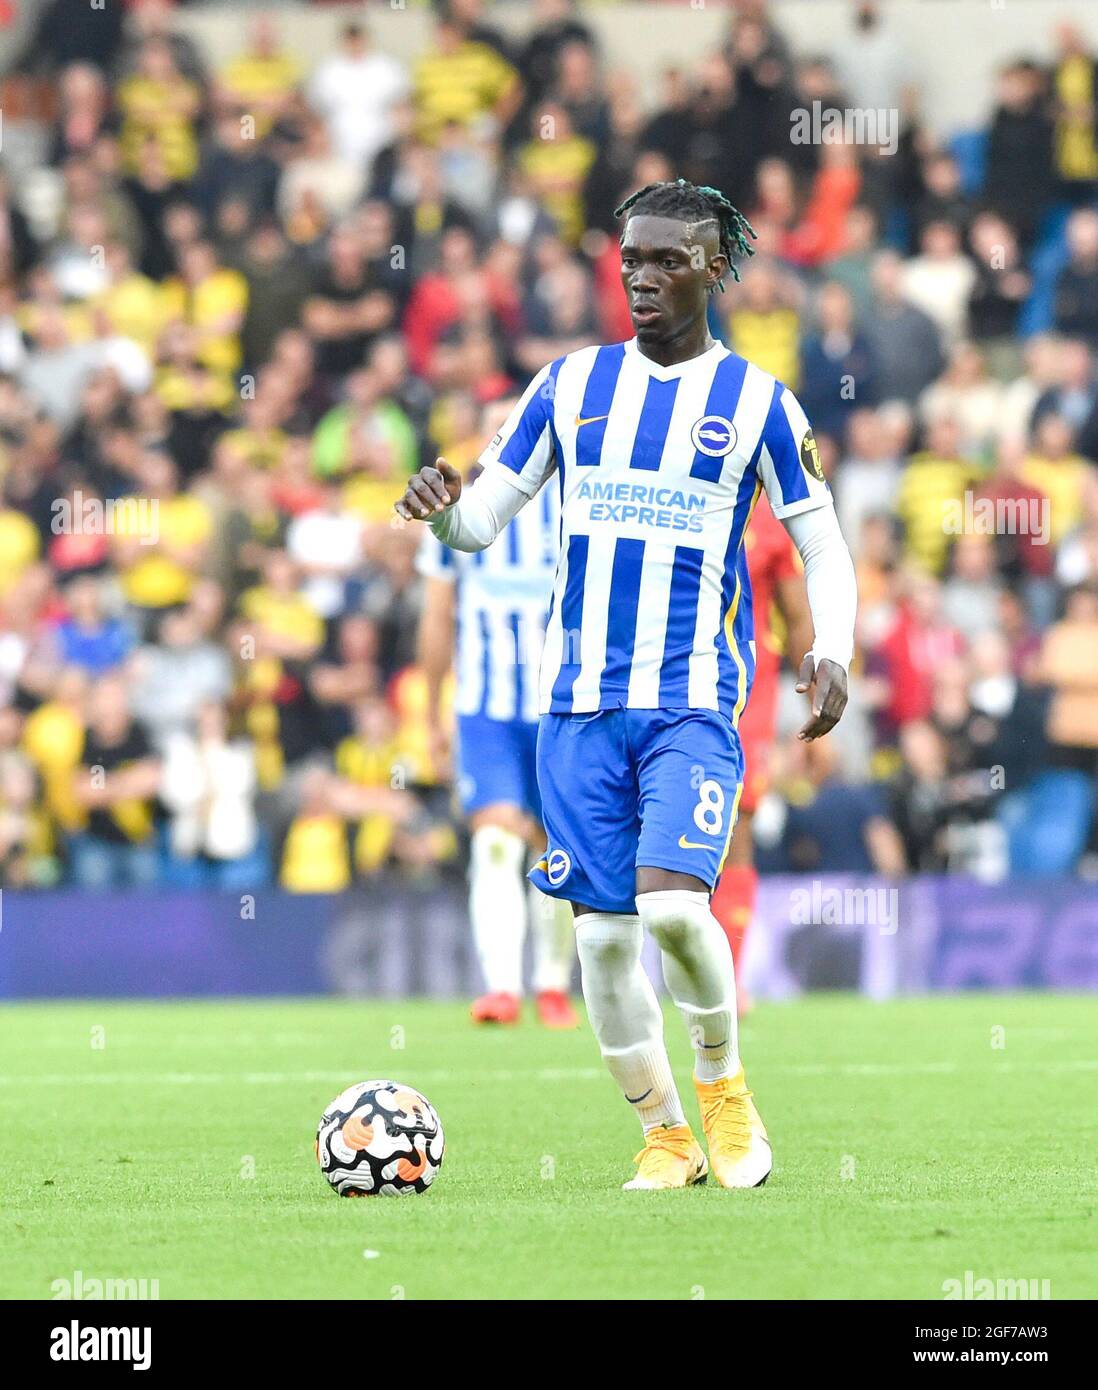 Yves Bissouma of Brighton during the Premier League match between Brighton and Hove Albion and Watford at the American Express Stadium  , Brighton , UK - 21st August 2021 - Photo Simon Dack/Telephoto Images Editorial use only. No merchandising. For Football images FA and Premier League restrictions apply inc. no internet/mobile usage without FAPL license - for details contact Football Dataco Stock Photo